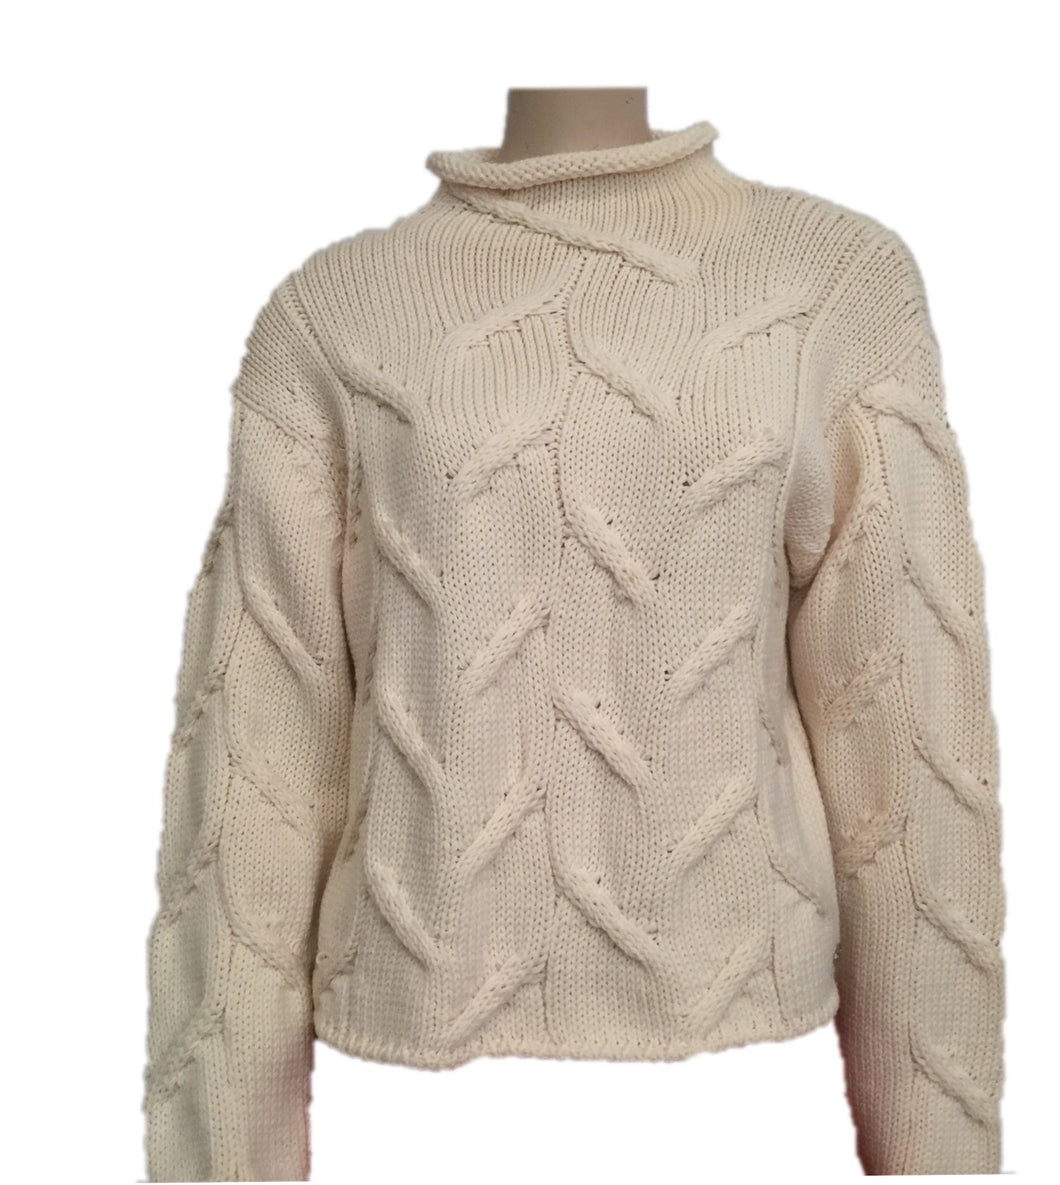 Vintage Chanel 99A, 1999 Fall winter white Ivory Ecru Cable Knit Wool Sweater FR 40 US 6/8